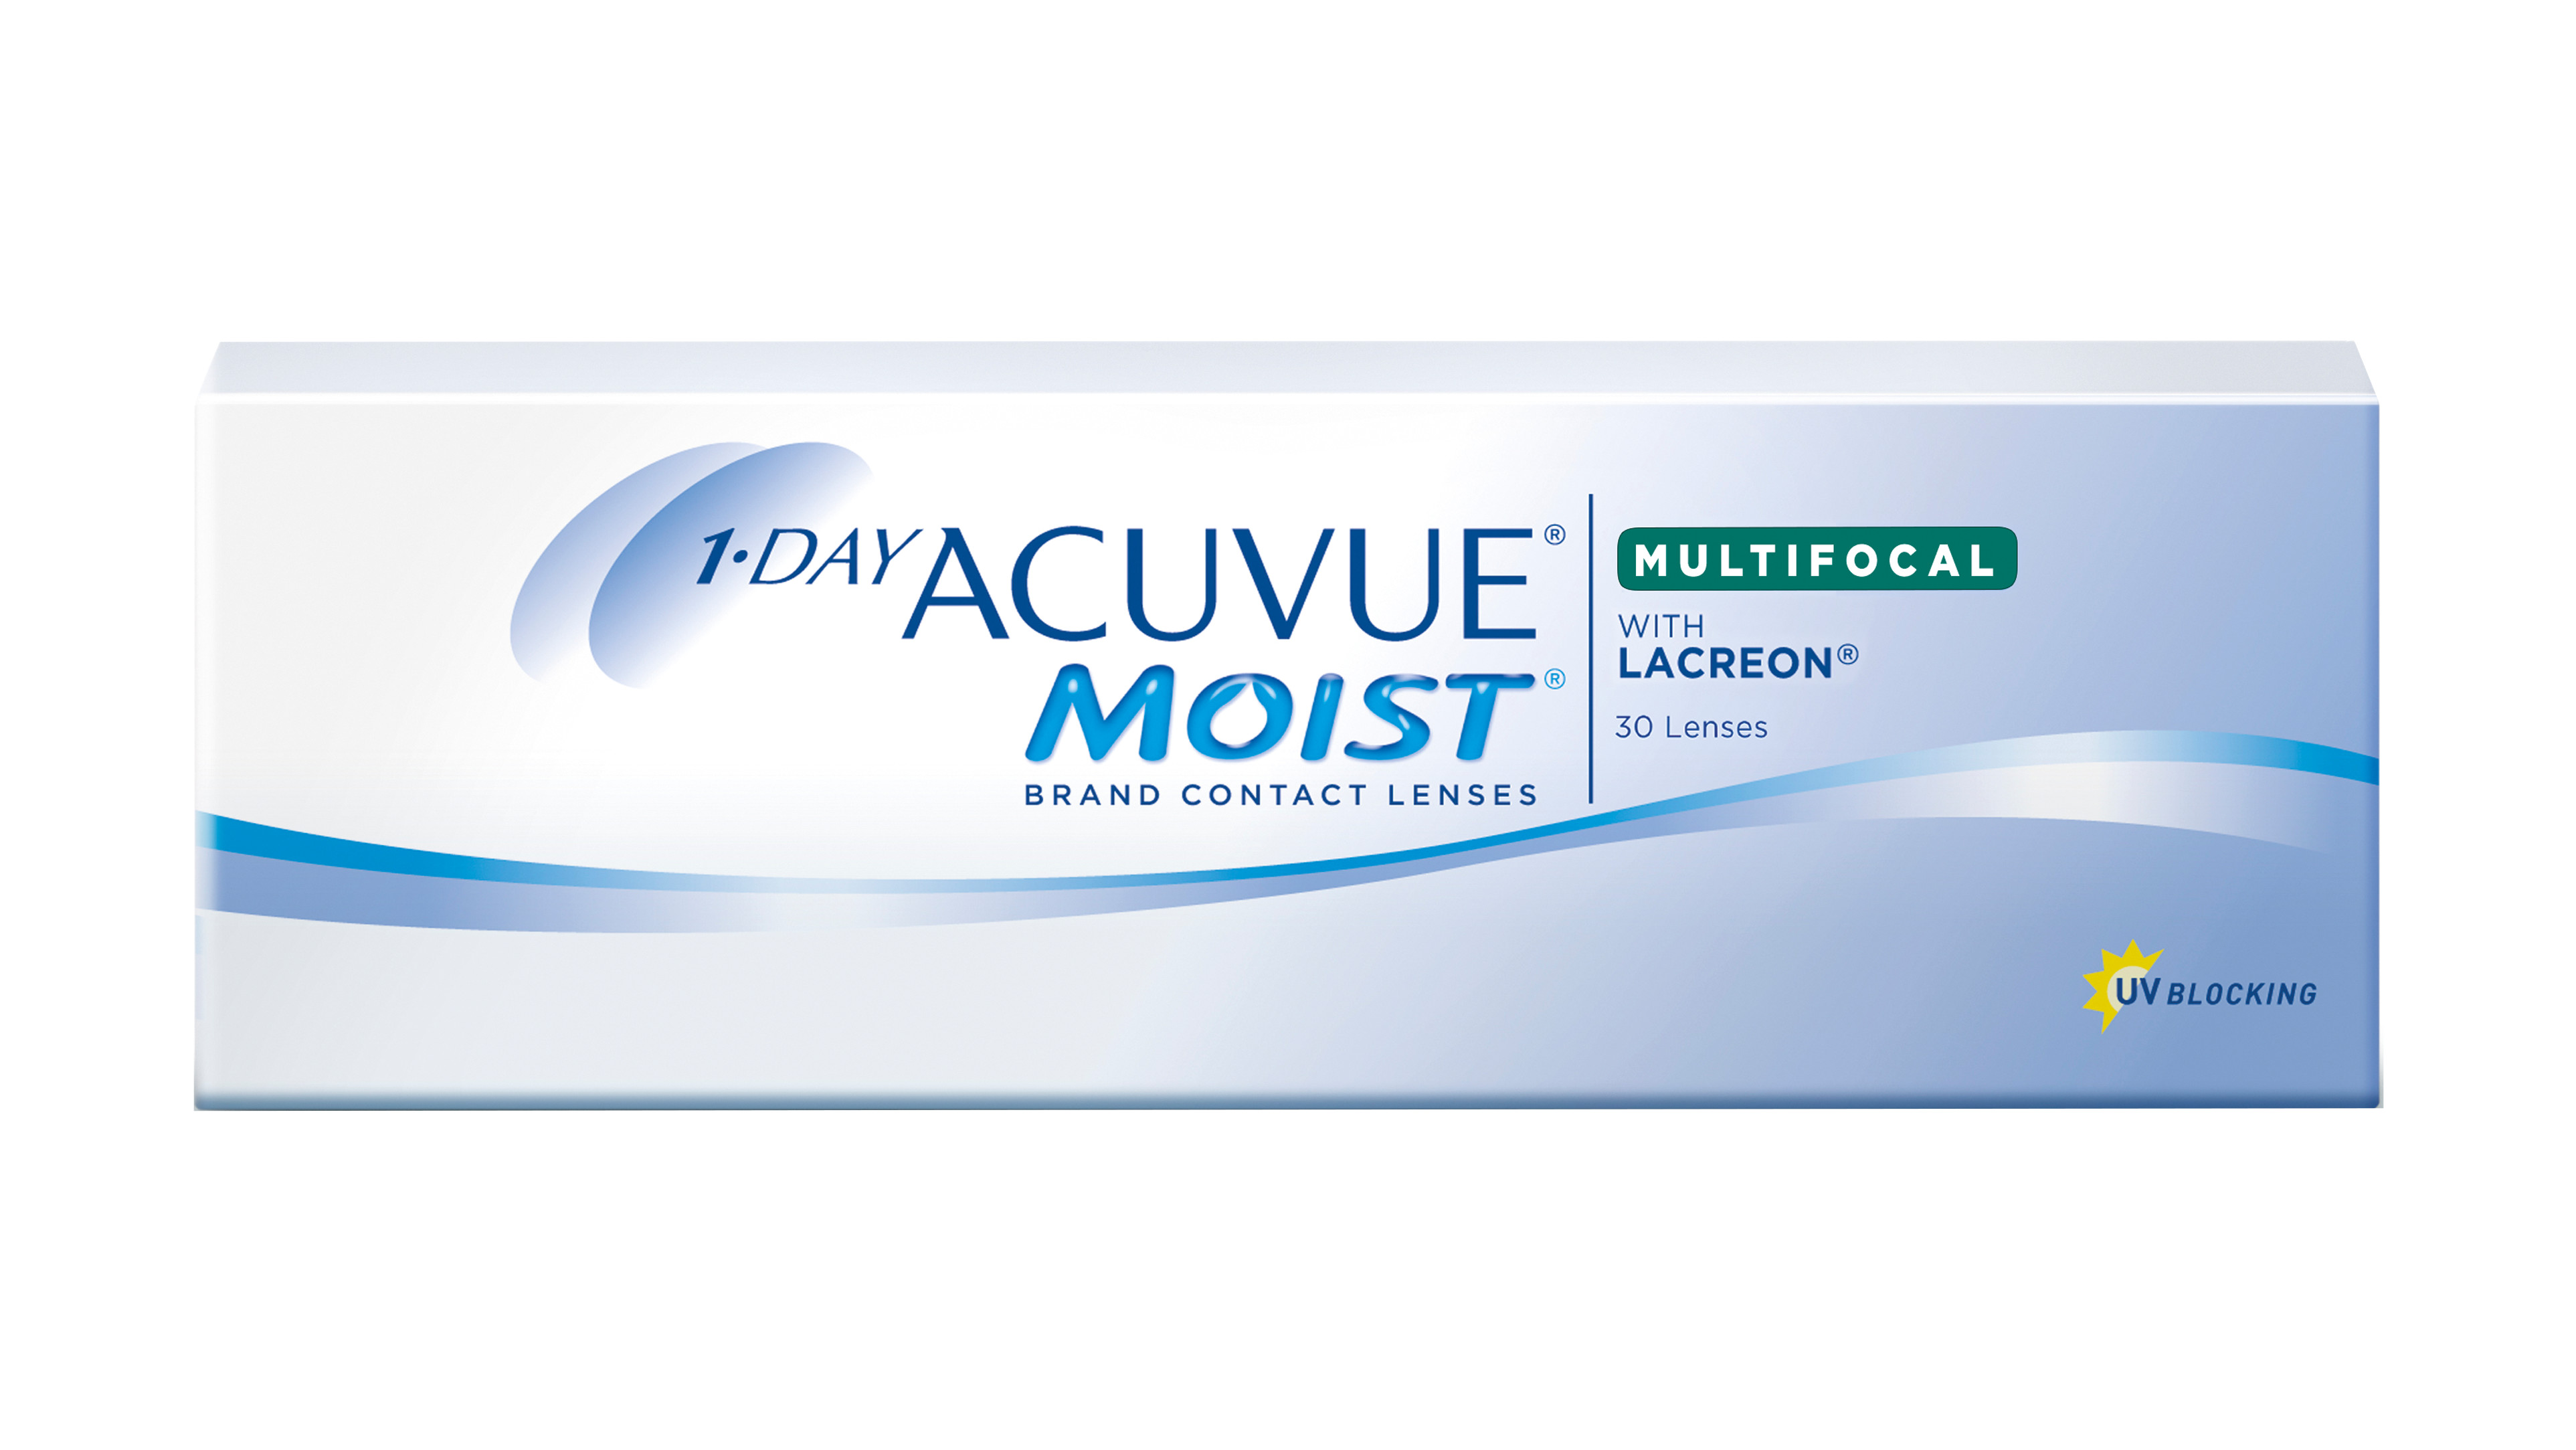 Front ACUVUE® 1-DAY ACUVUE® MOIST MULTIFOCAL Tageslinsen 30 Linsen pro Packung, pro Auge